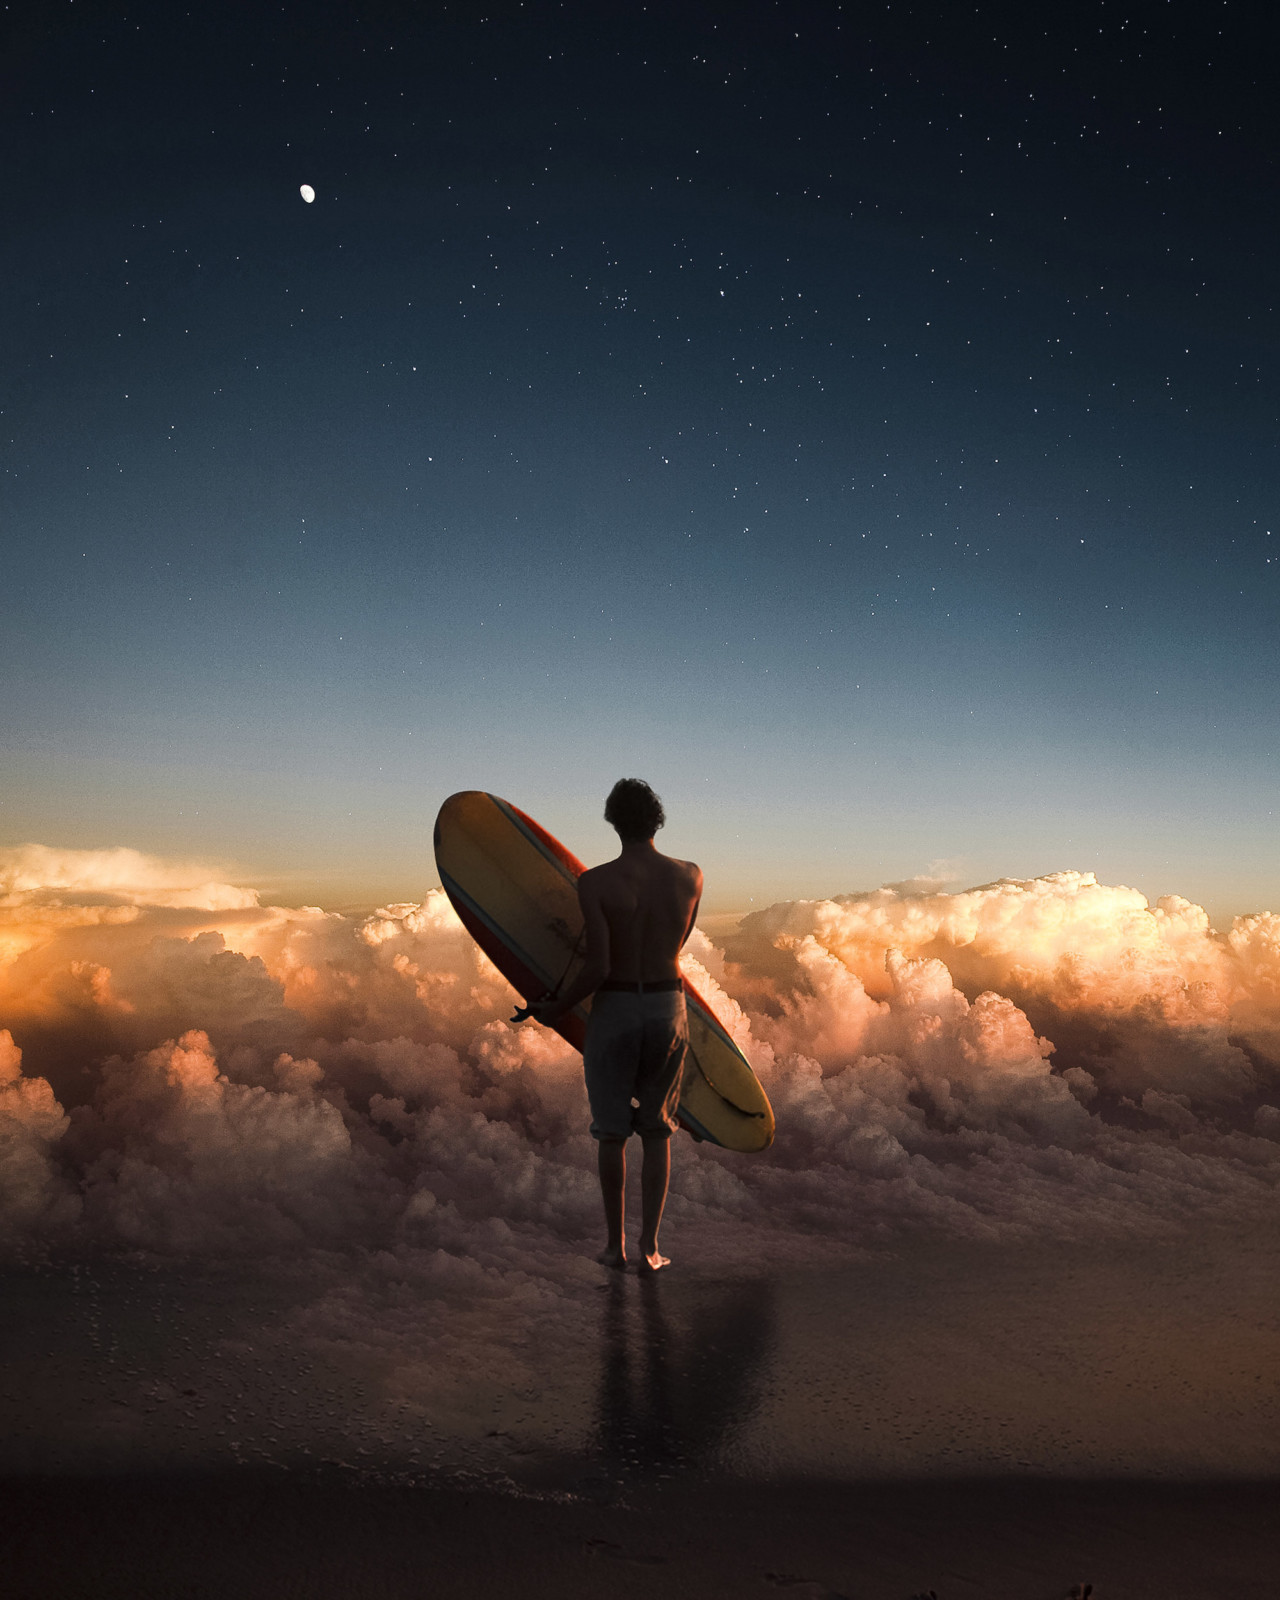 Photo manipulations combining stock imagery by Justin Peters